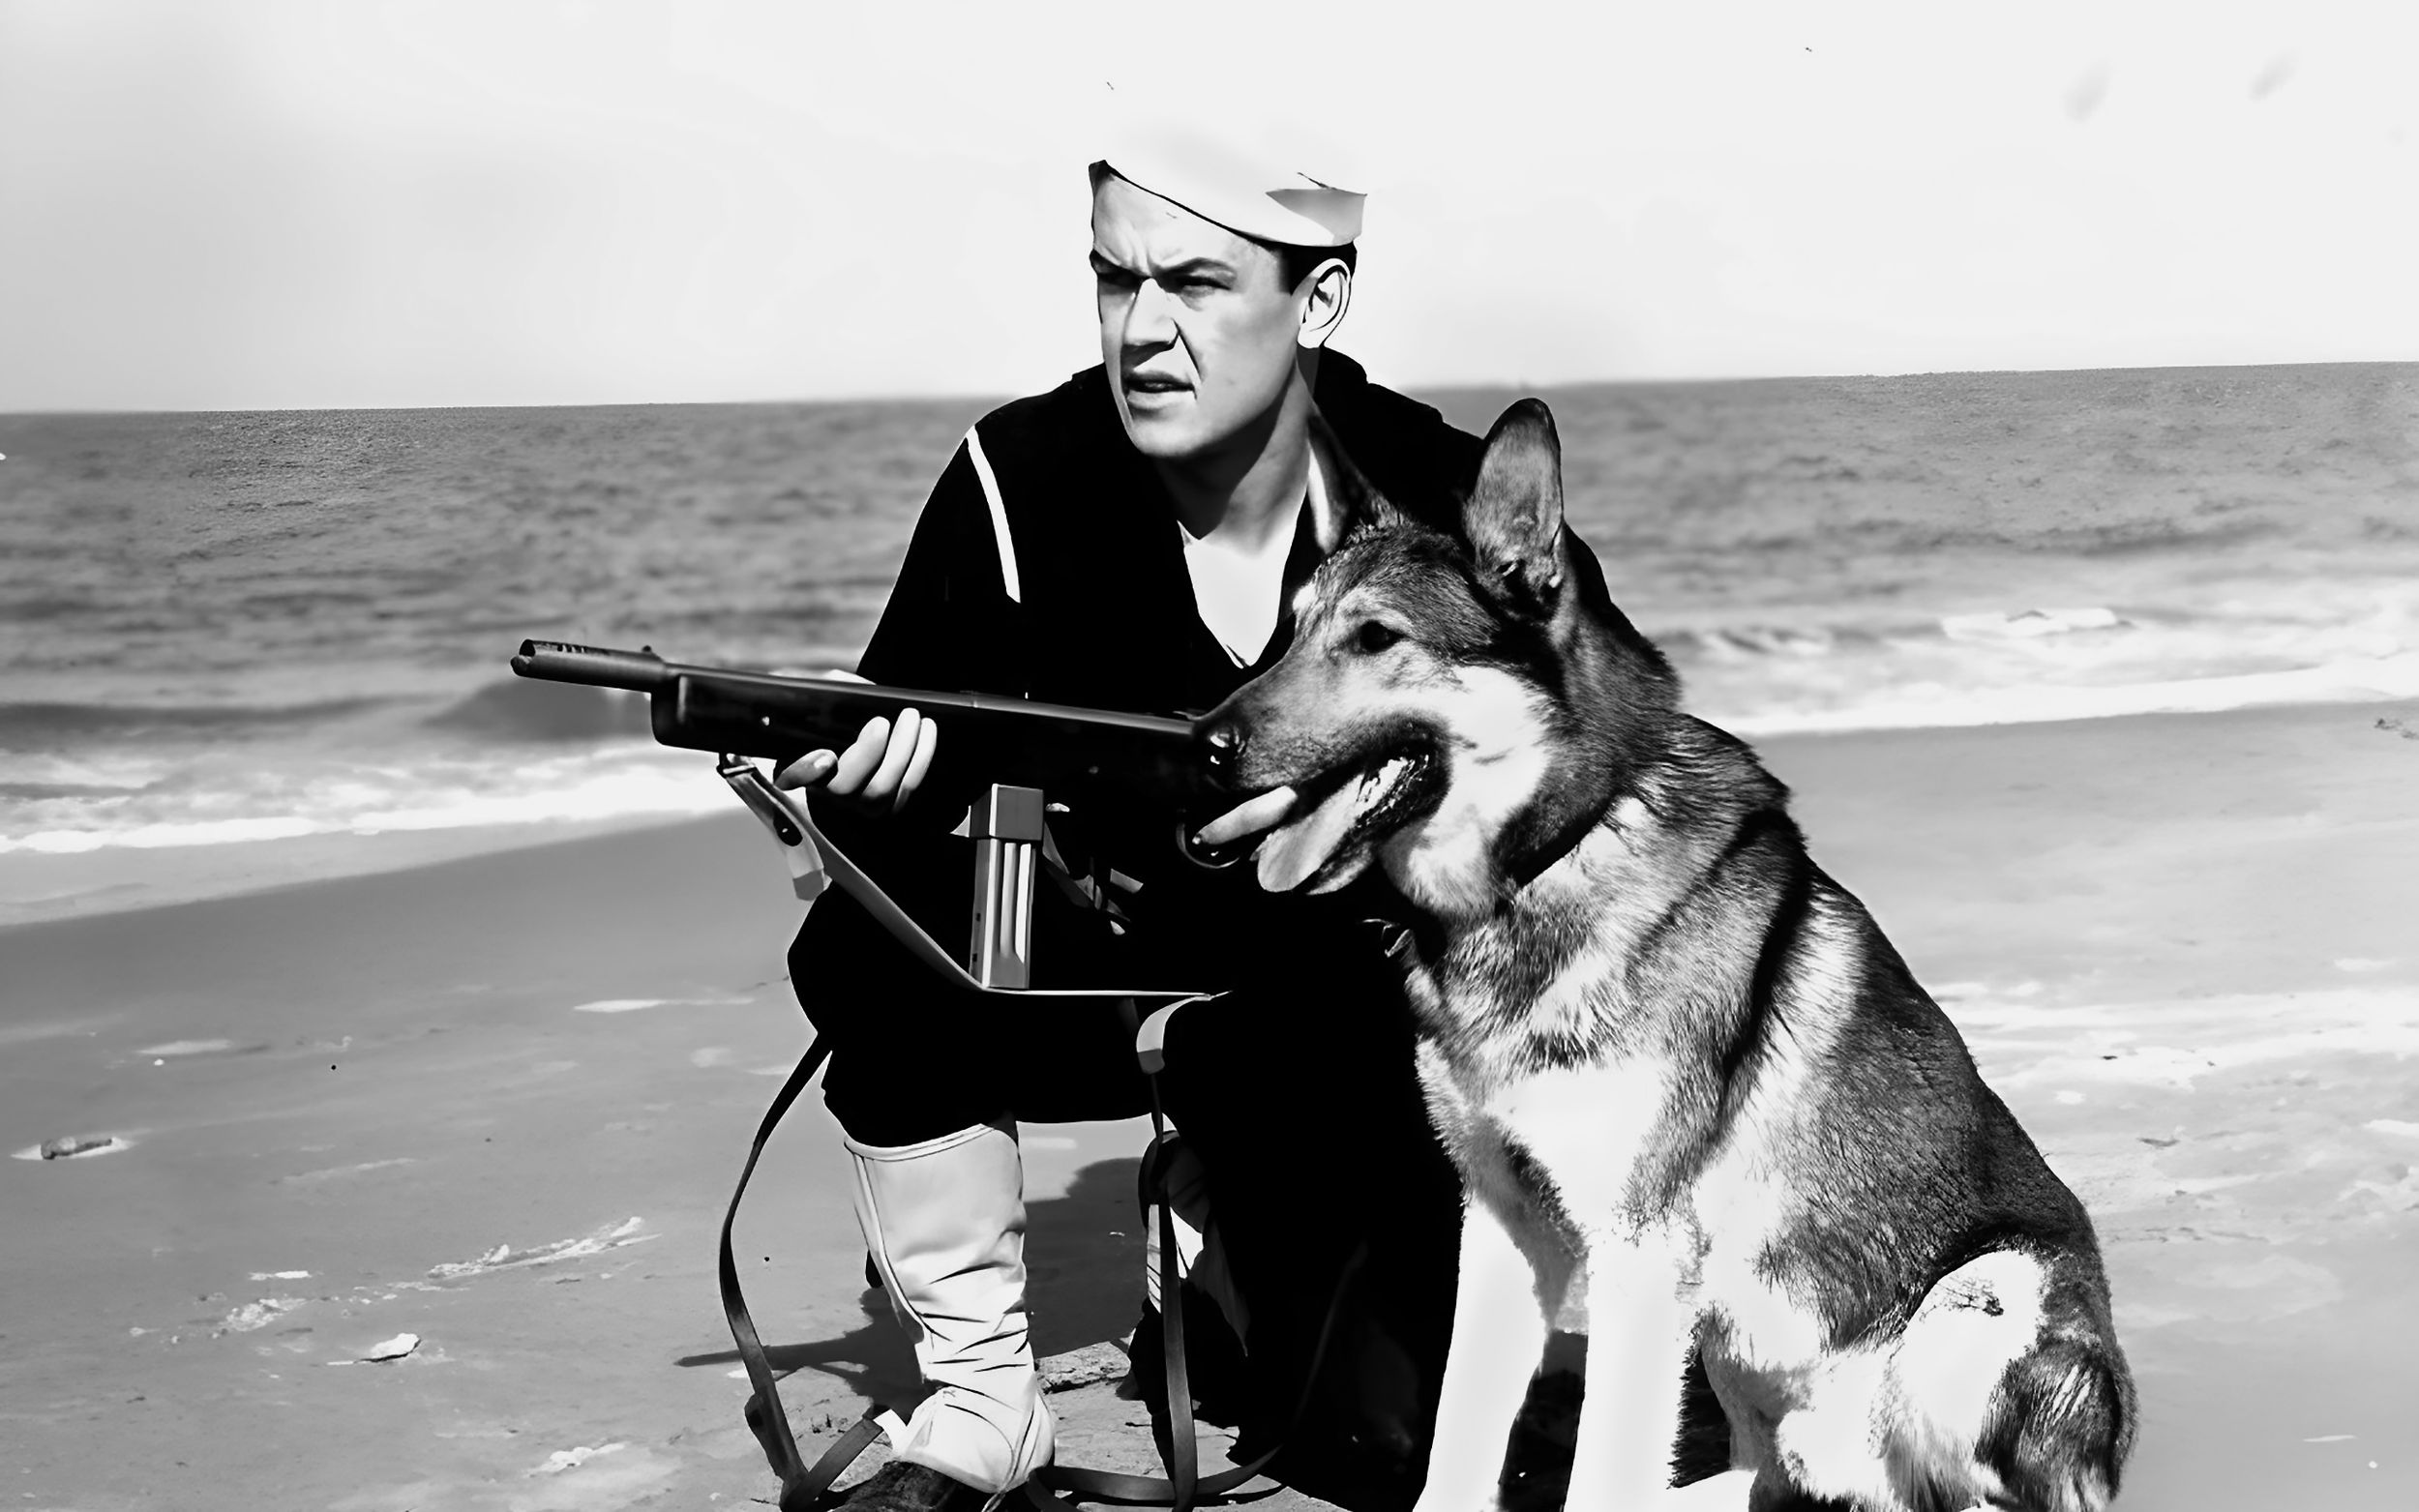 A U.S. Coast Guardsman carries a Model 50 Reising submachine gun while on patrol with his dog. The Reising proved to be quite unpopular with line troops fighting during World War II, particularly Marine units in tropical climates.